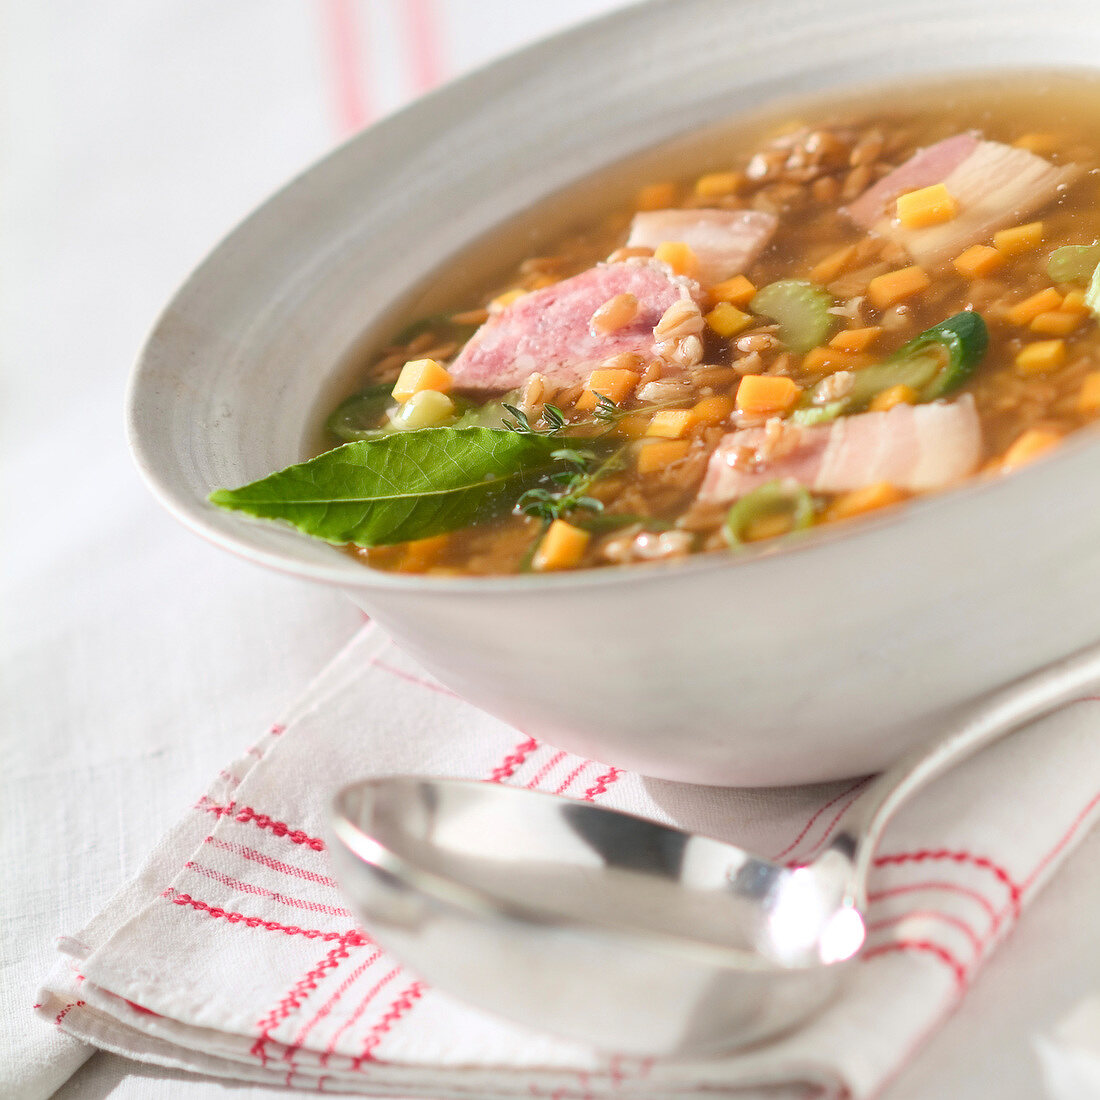 Wheat soup with pork and bacon